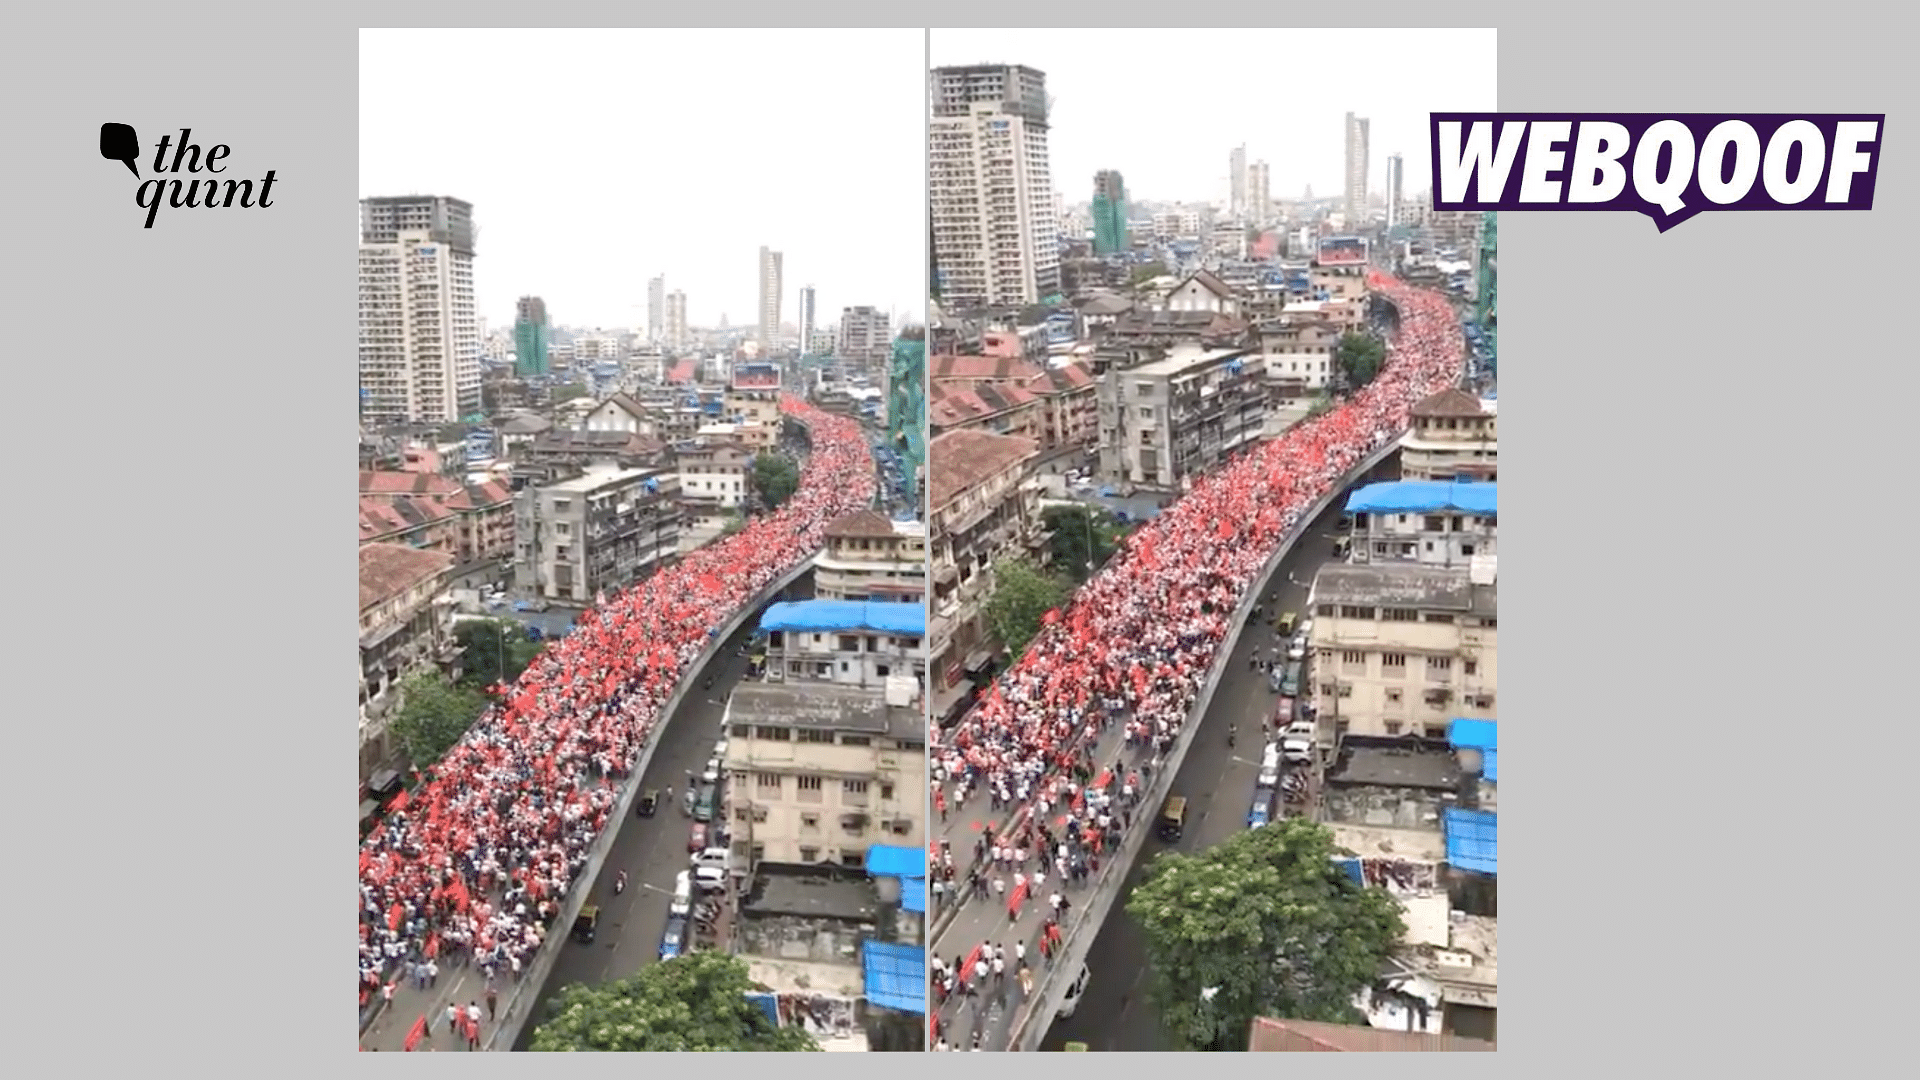 <div class="paragraphs"><p>The video dates back to 2017, when the Maratha Kranti Morcha took a rally demanding reservation and loan waivers for the Maratha community in Maharashtra.</p></div>